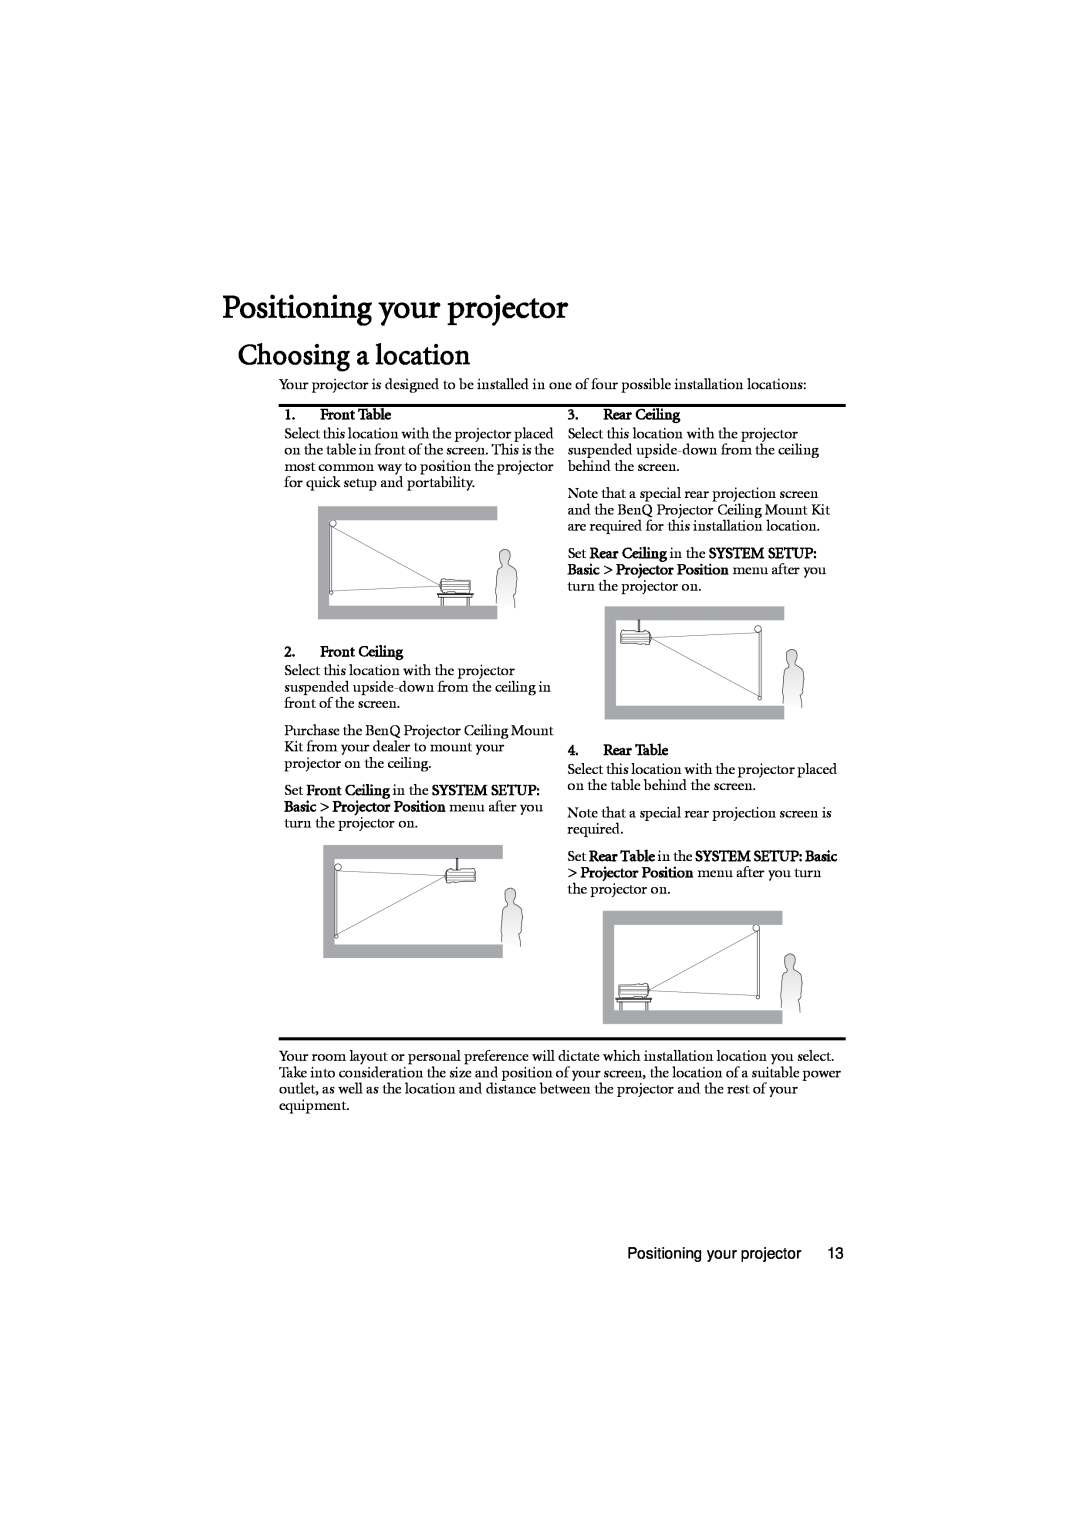 BenQ MX701 user manual Positioning your projector, Choosing a location 